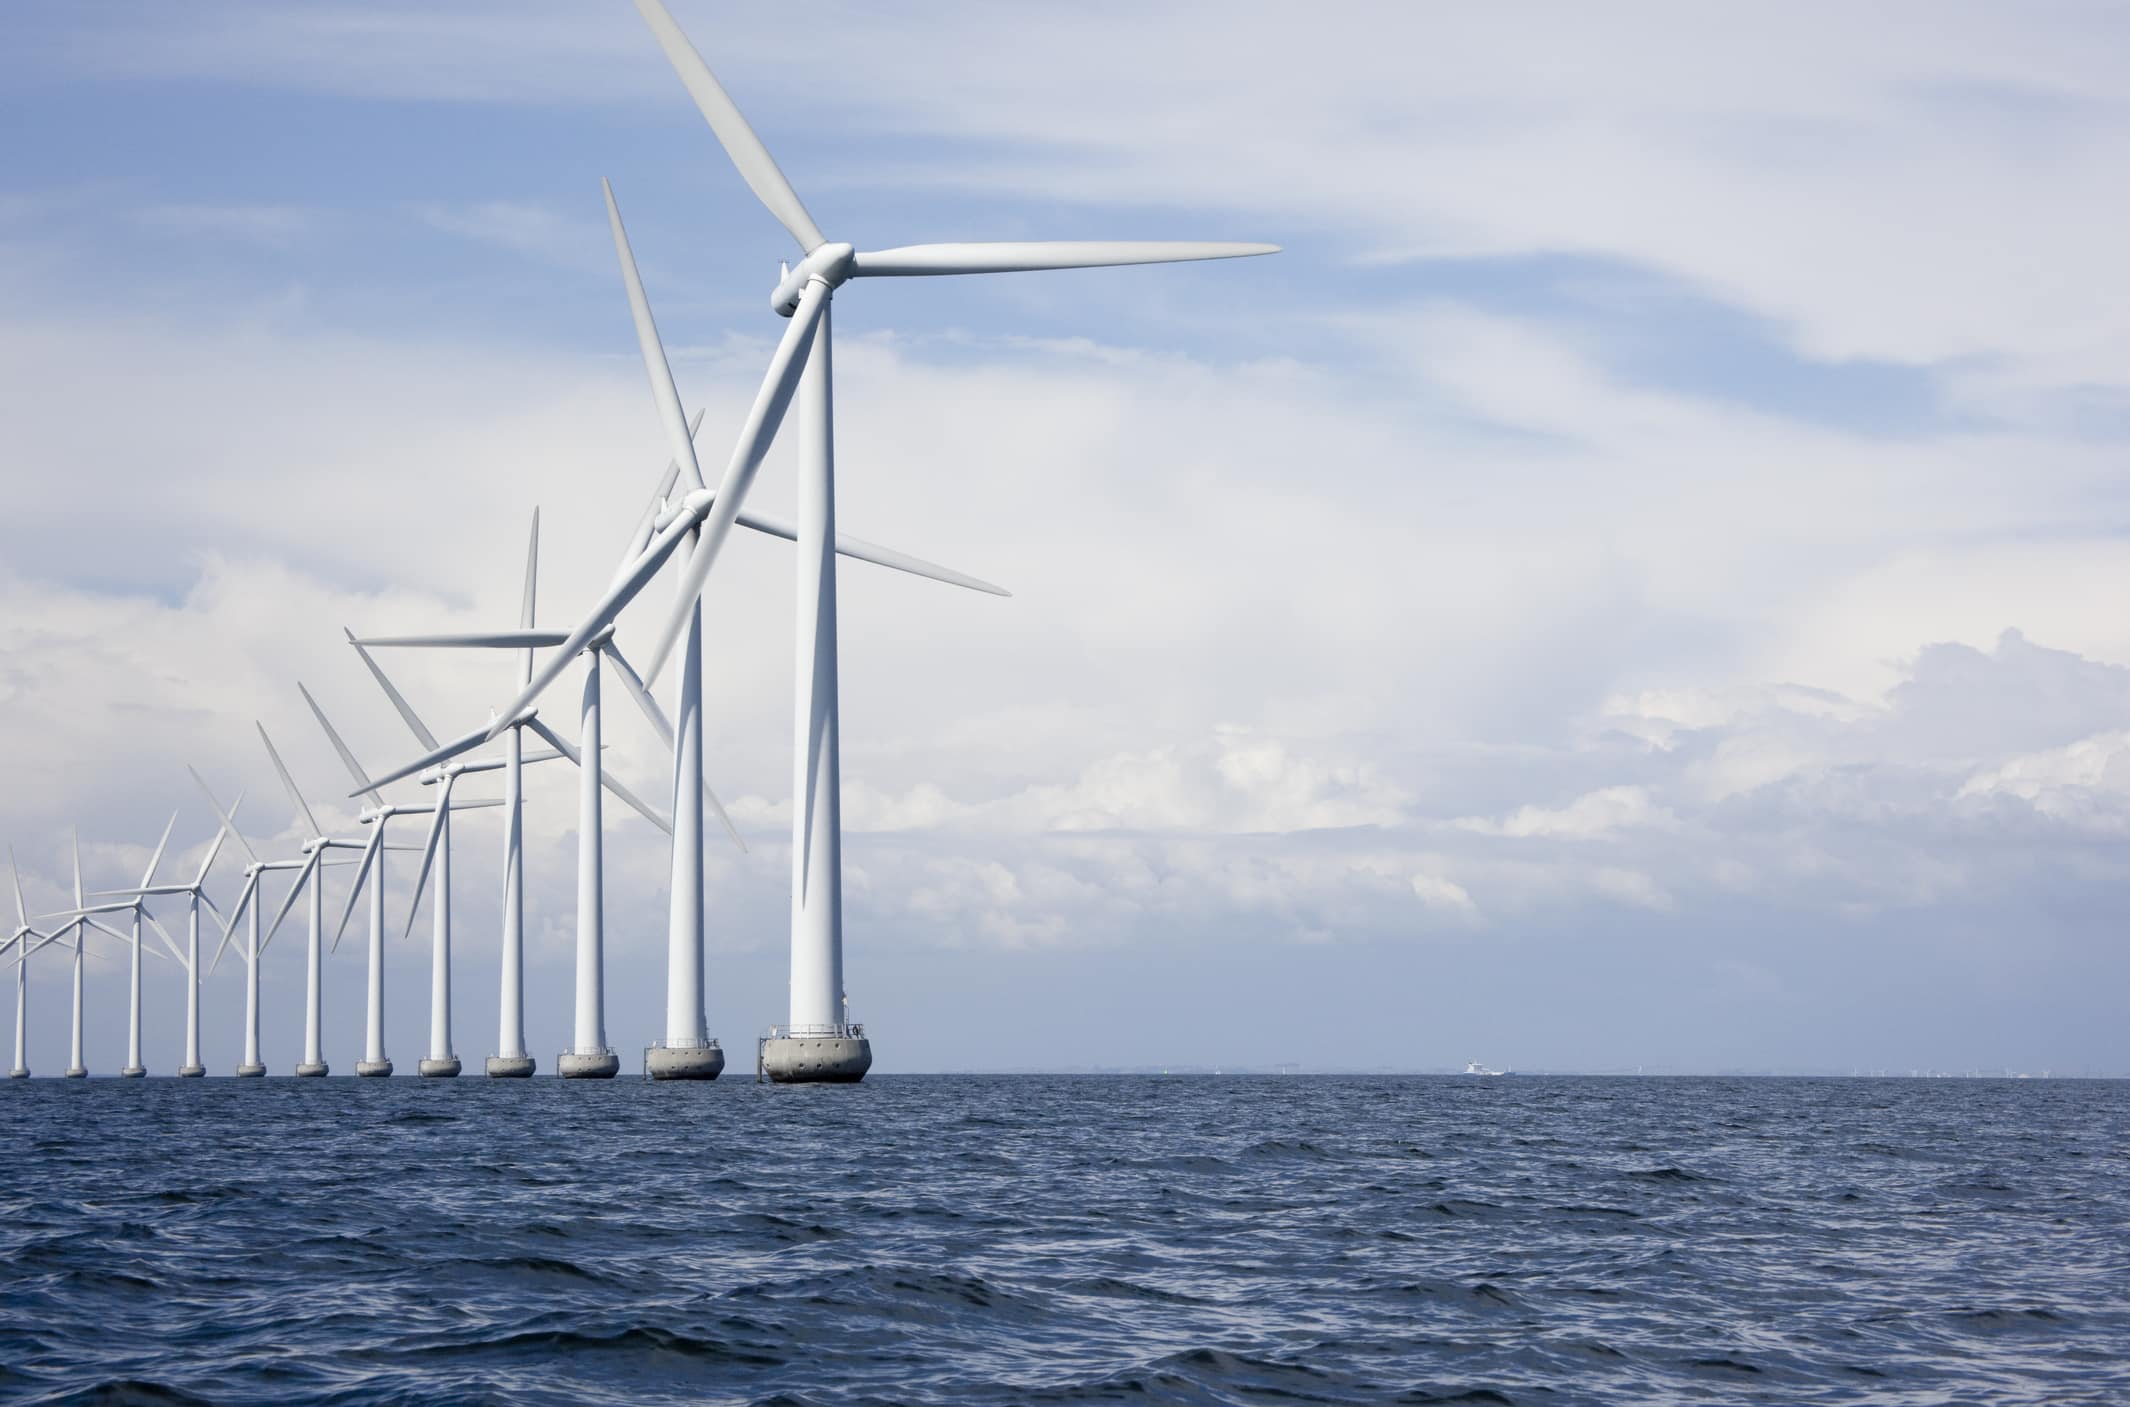 Add water: Report says offshore wind power could meet global demand